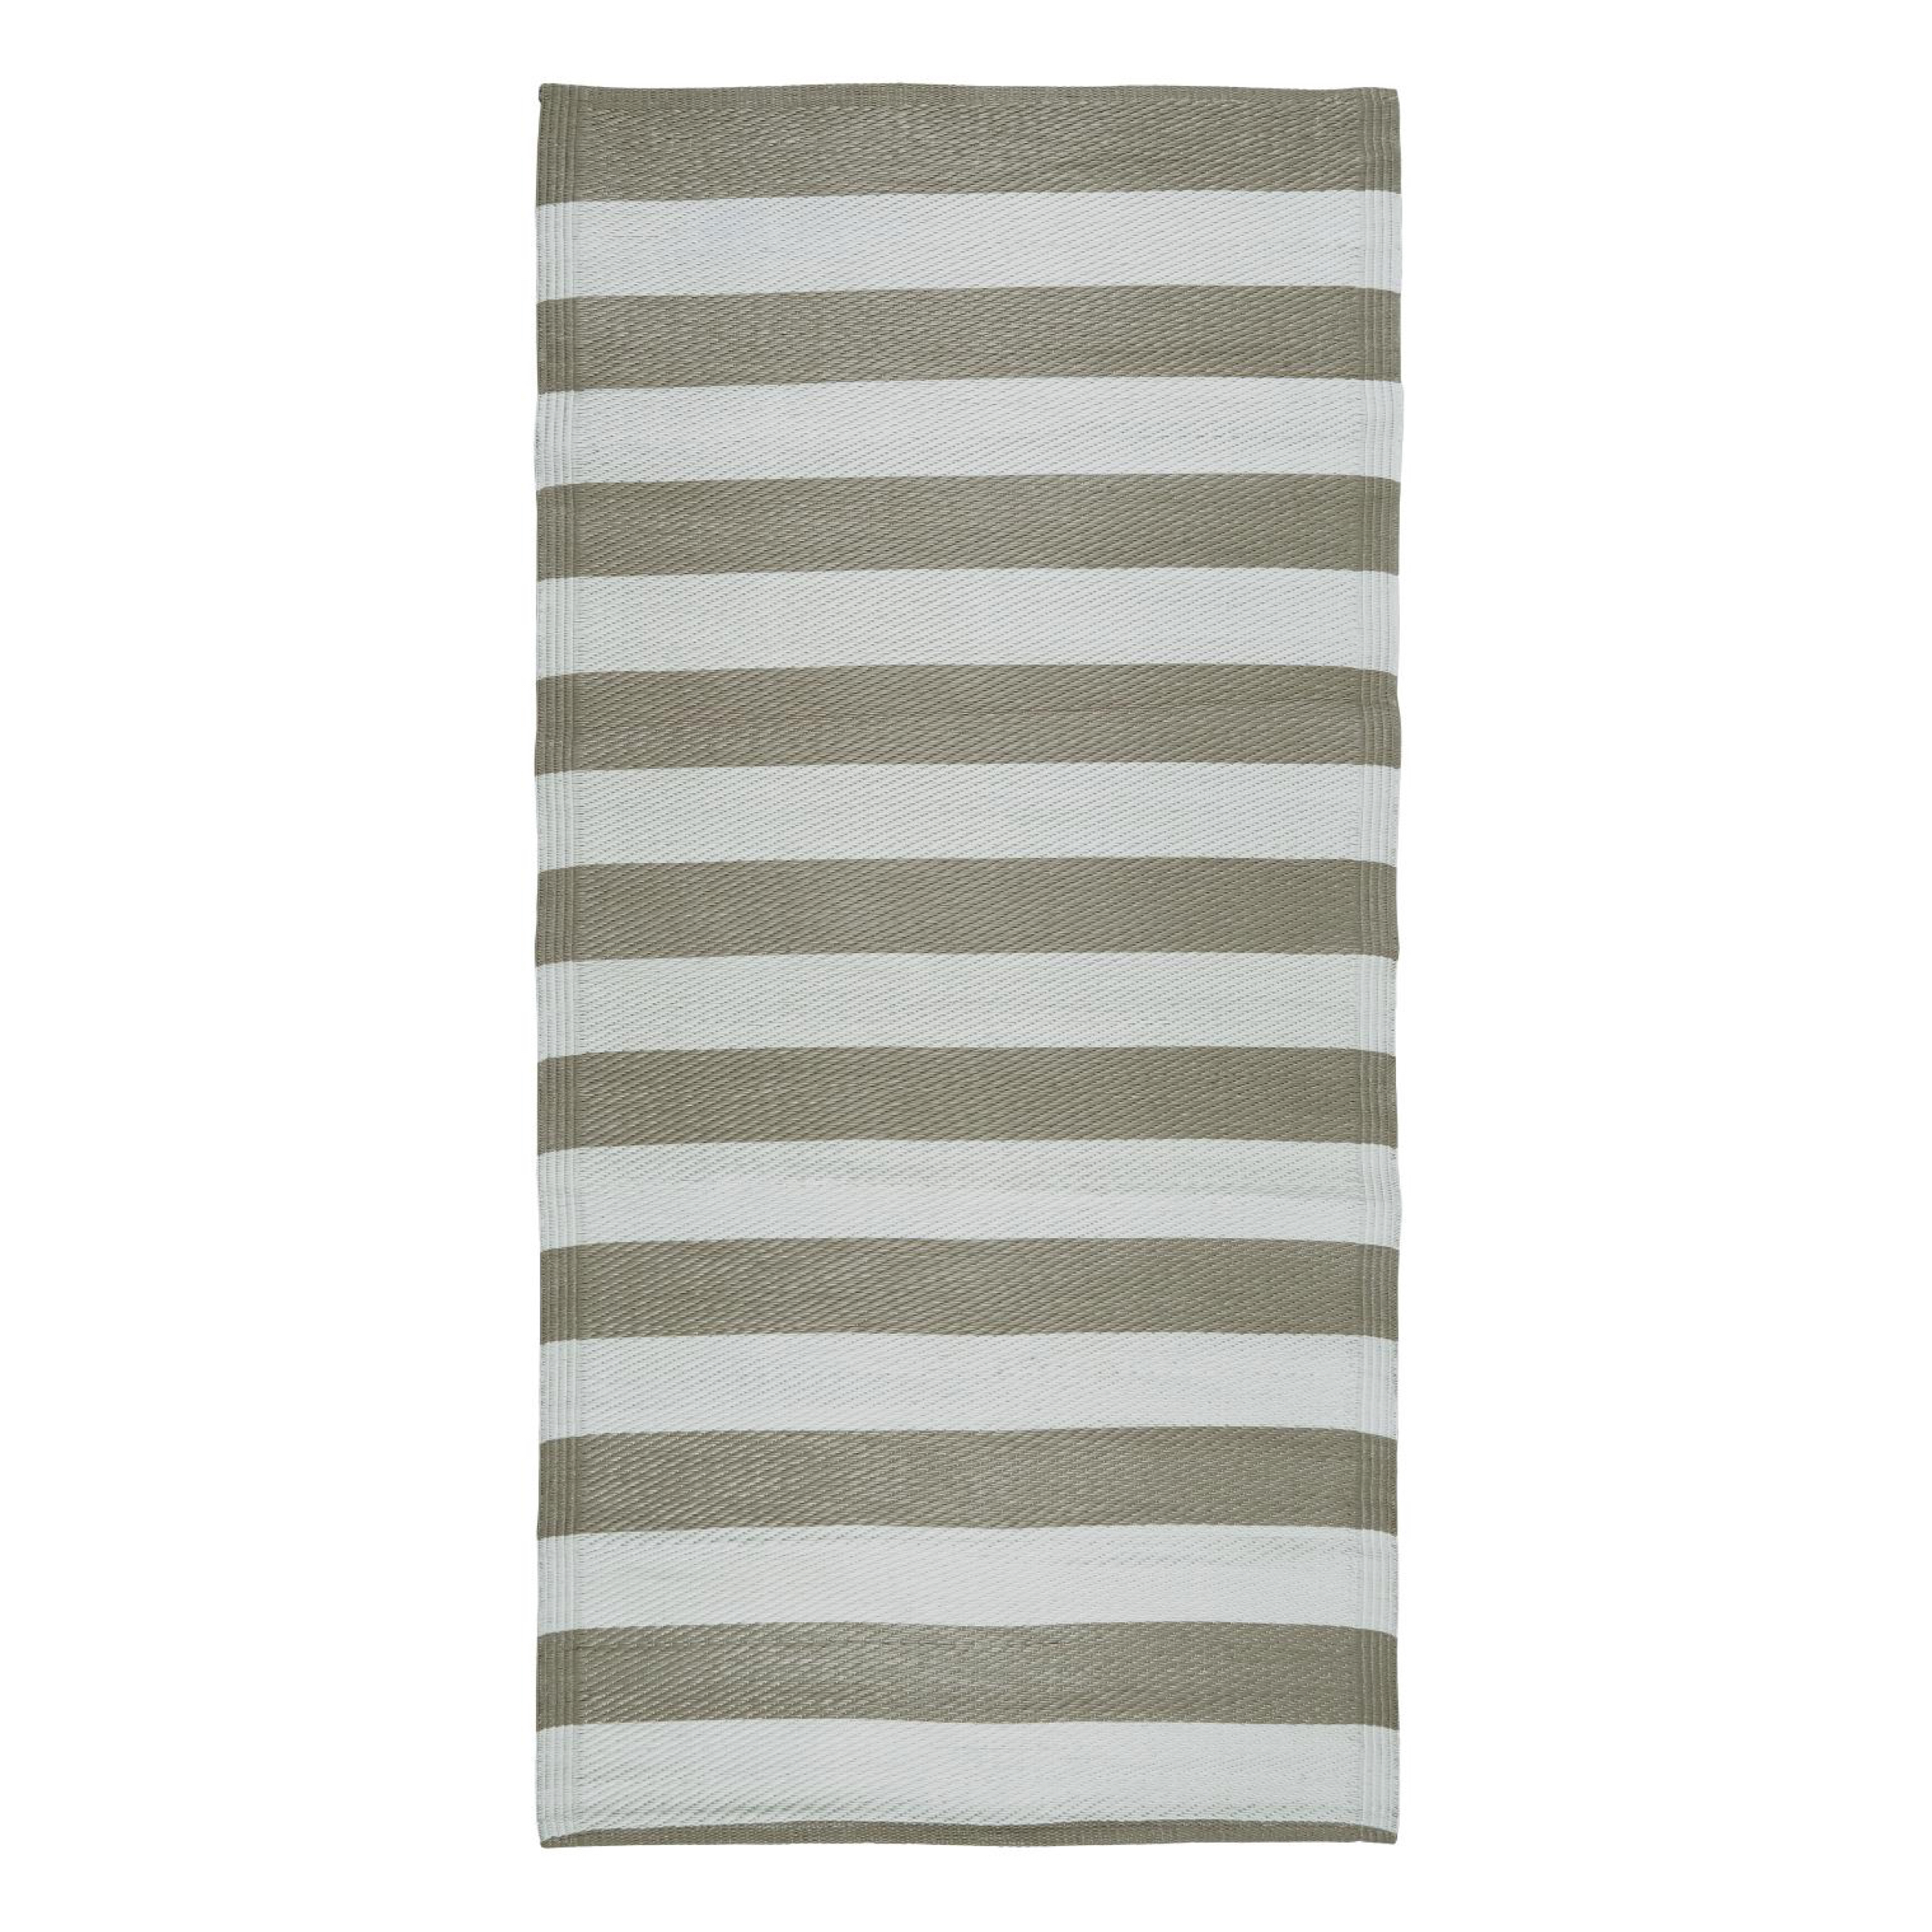 Ib Laursen Wide Striped Ruge in Recycled Plastic - Coral Sands 